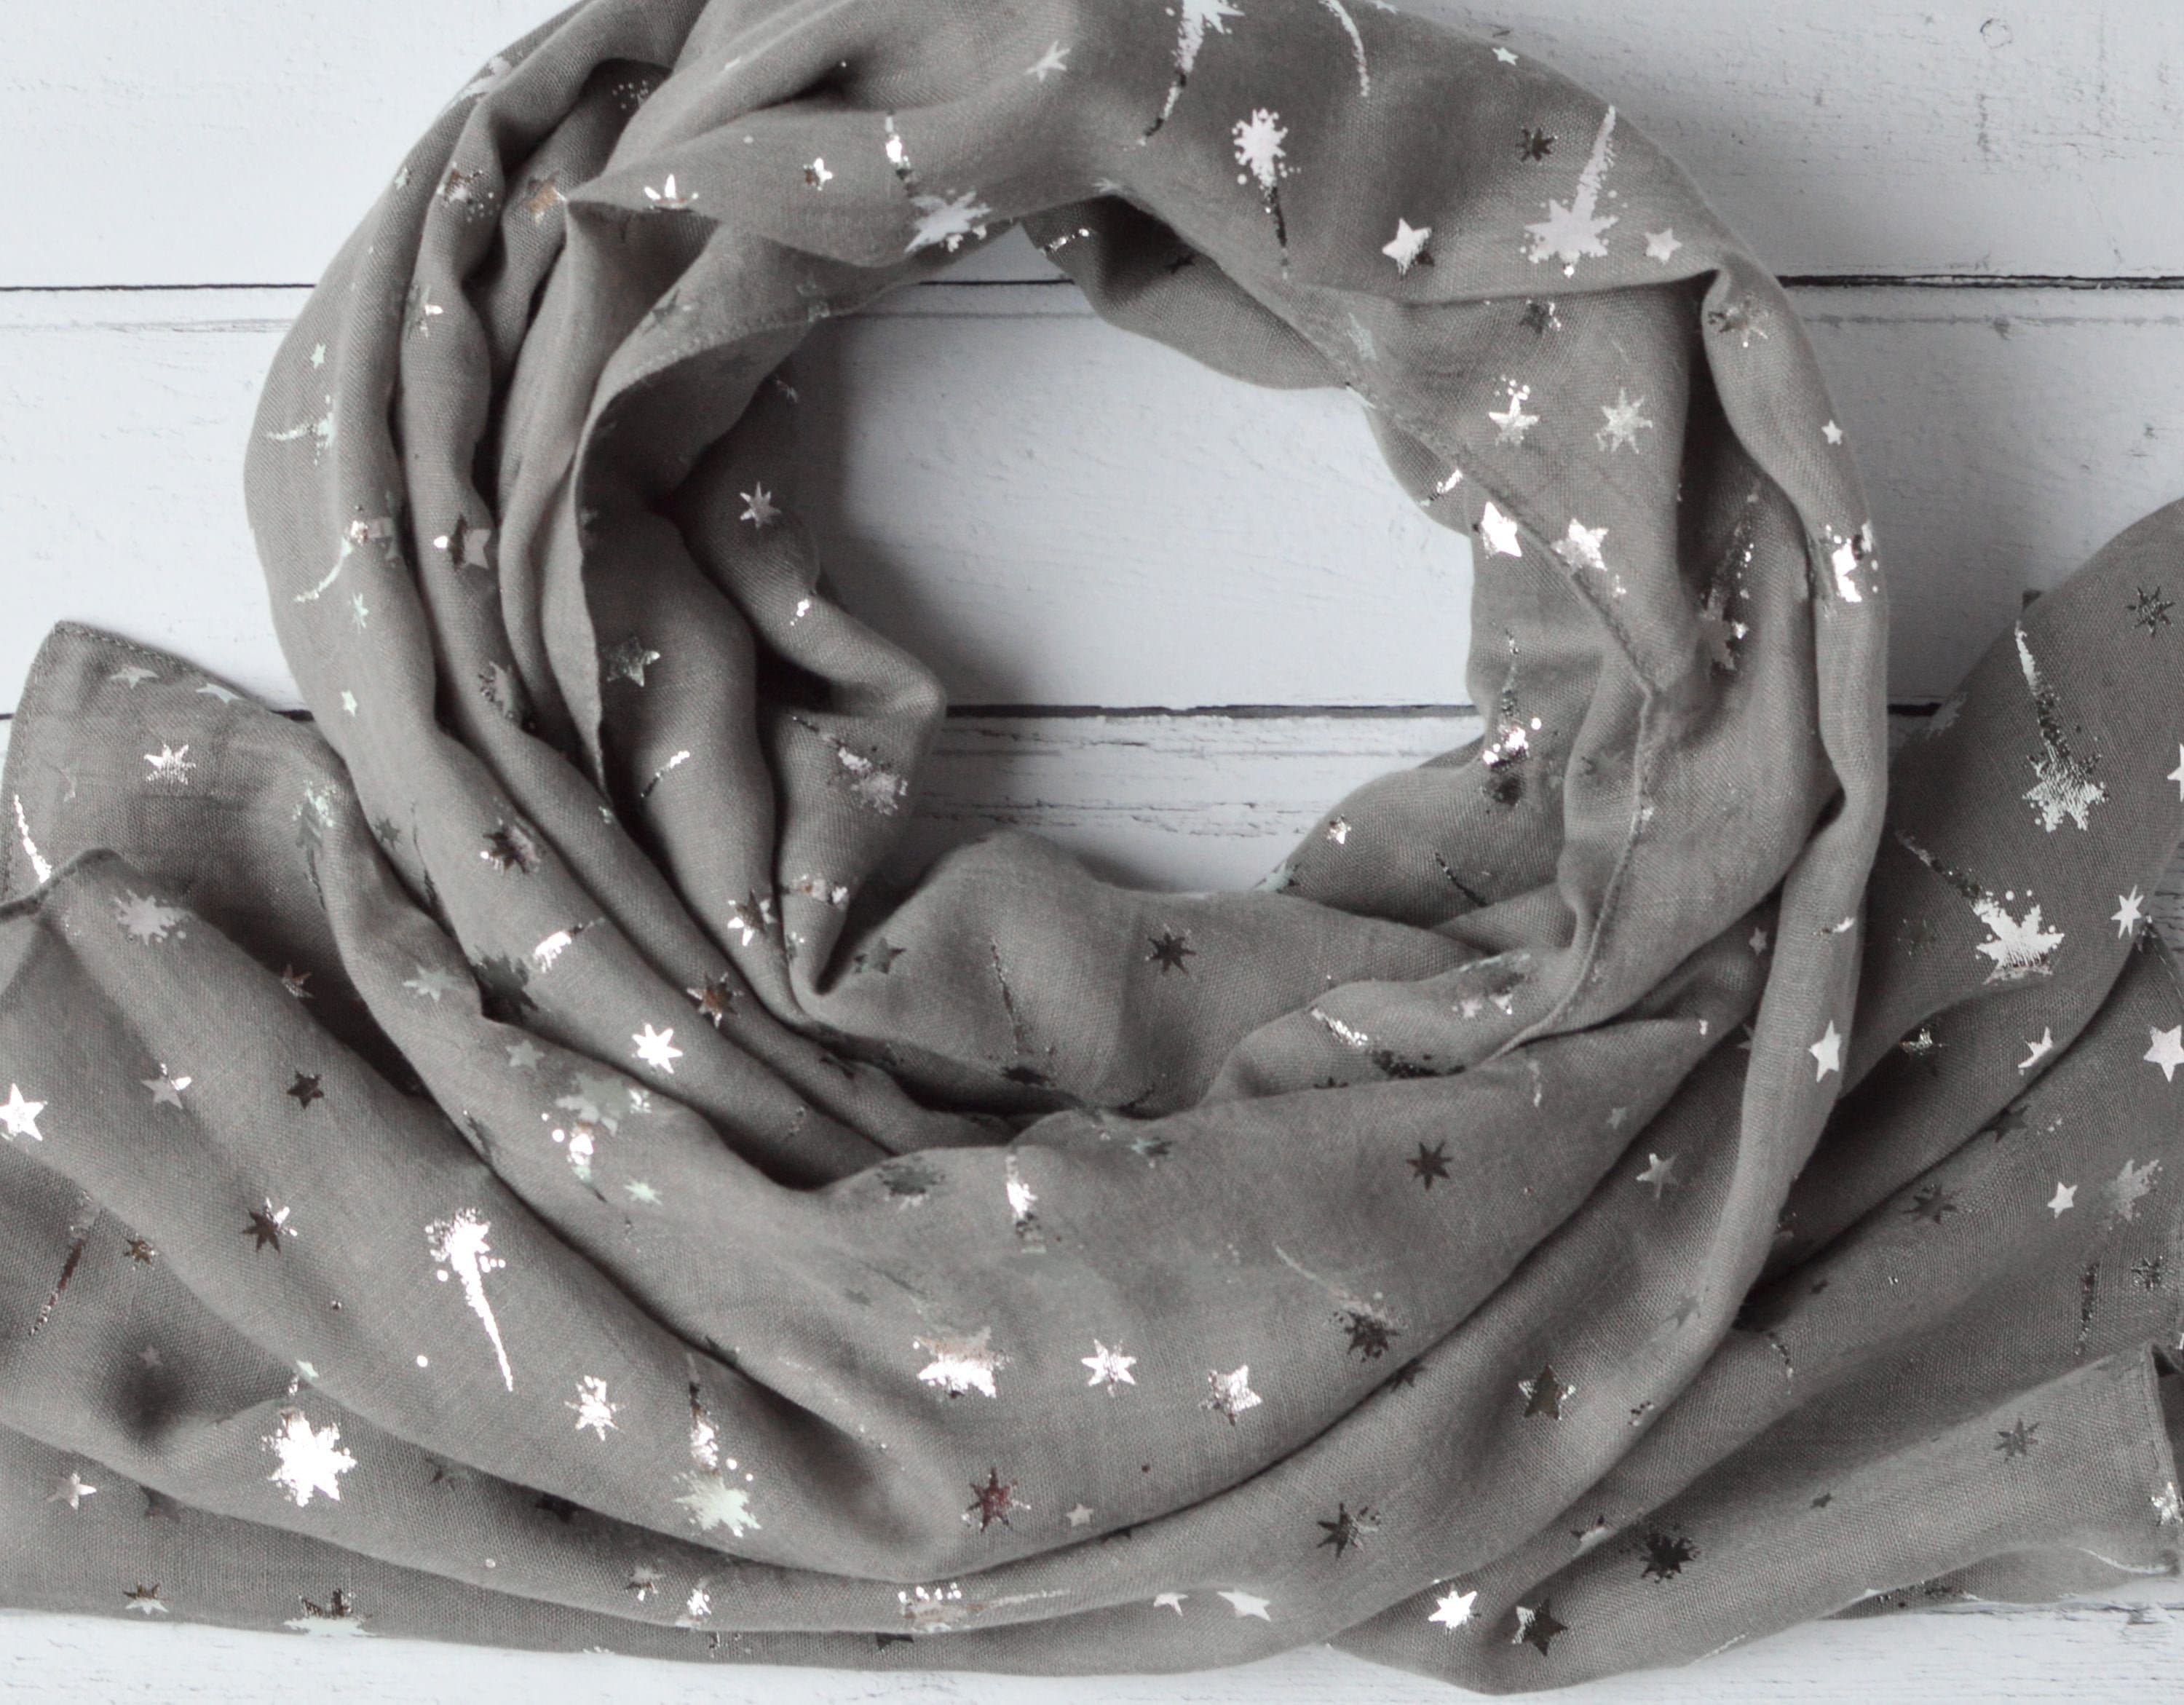 Shooting Stars Scarf Navy Blue Light Weight Wrap with Metallic Silver Foil Celestial Design